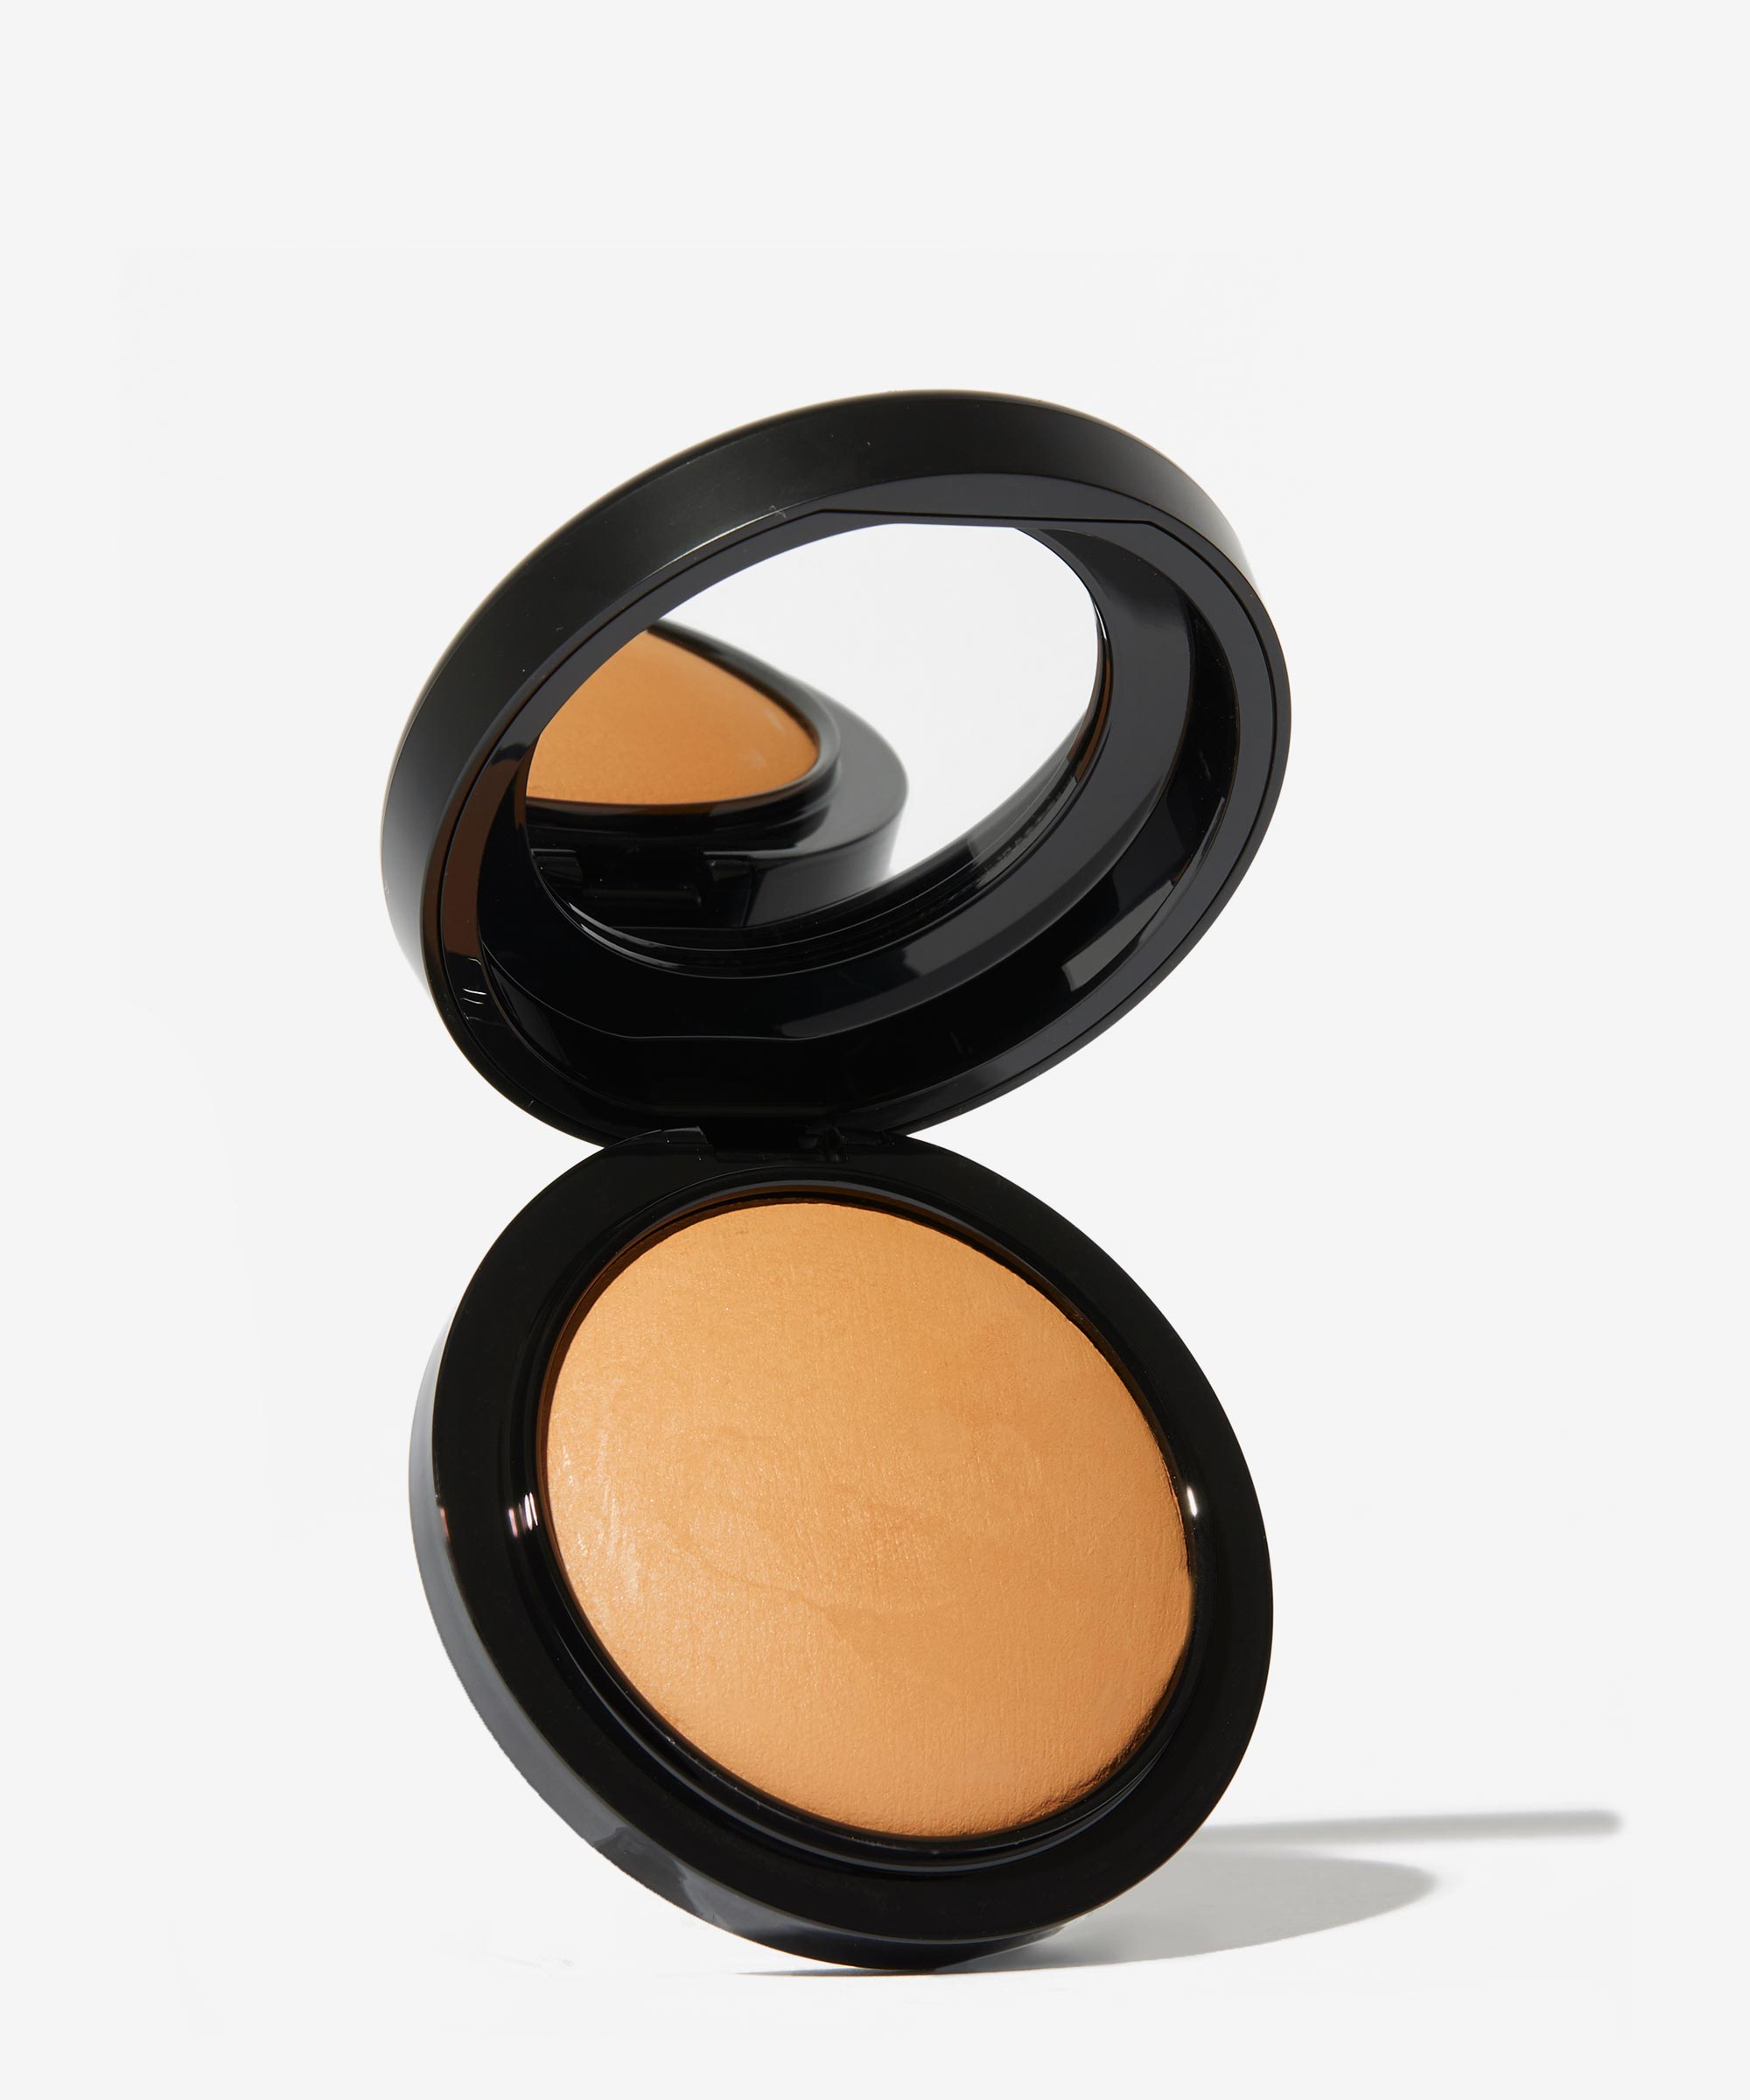 8 Underrated MAC Products You Need To